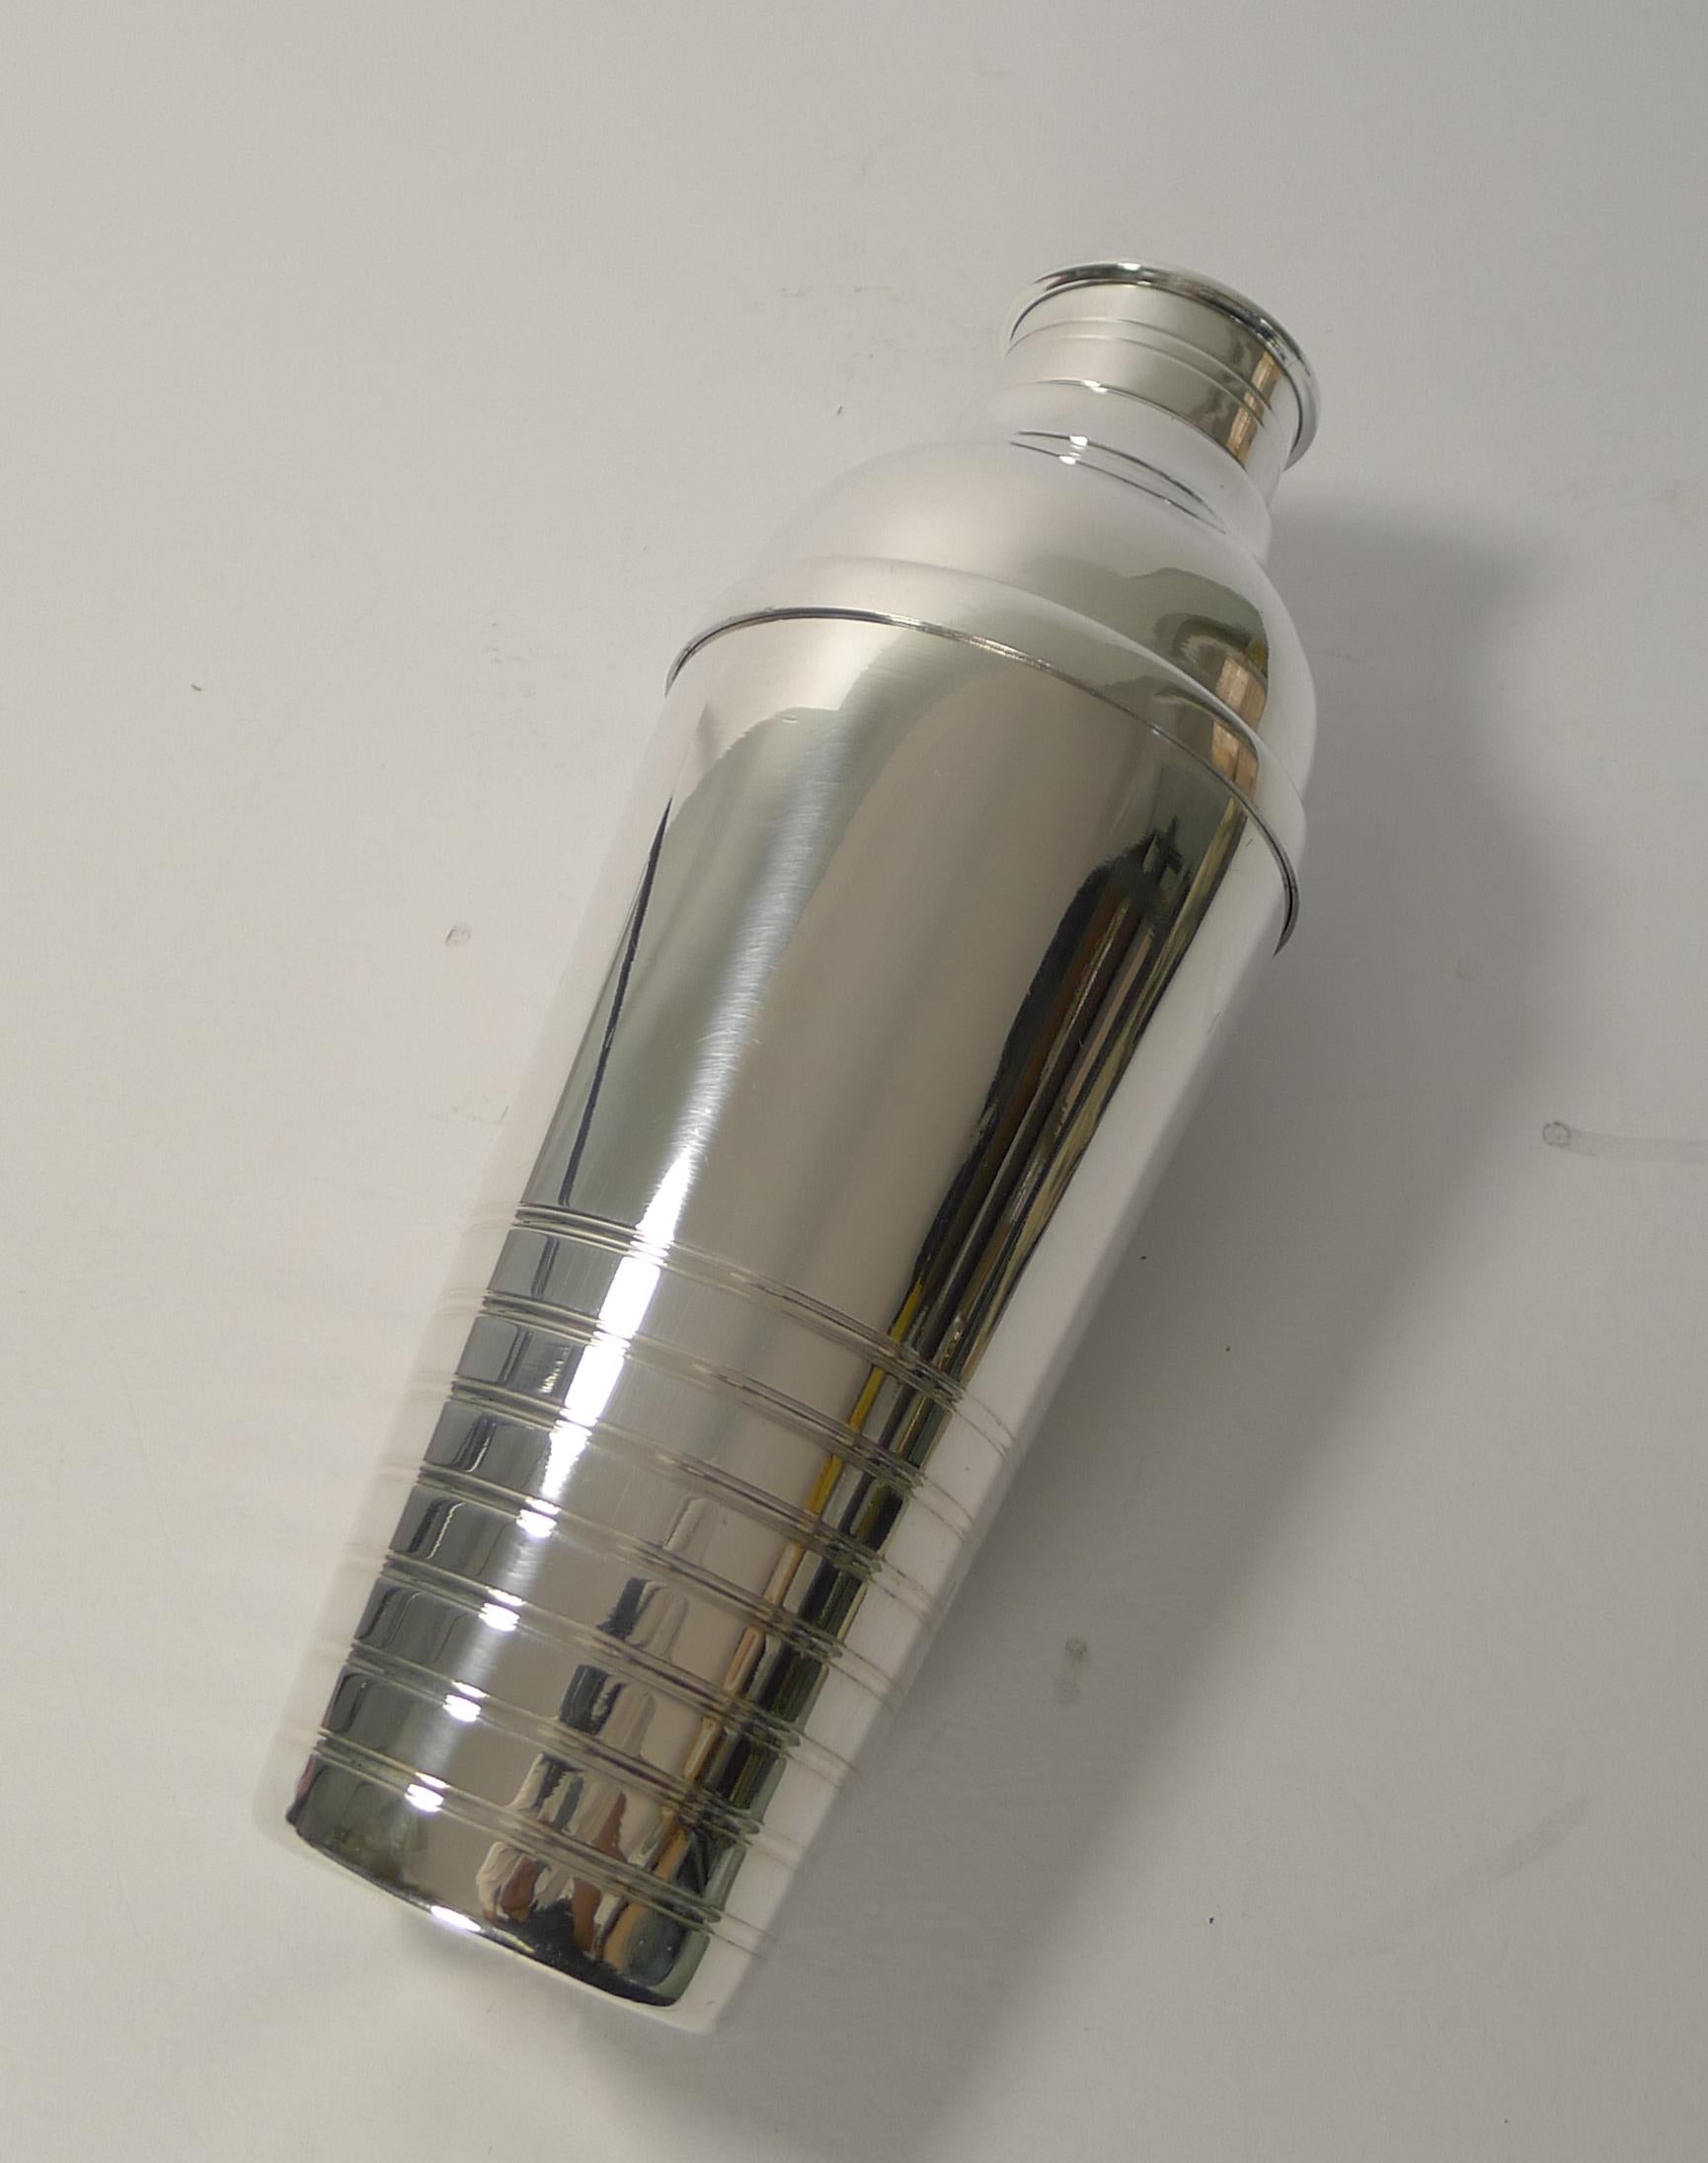 A very grand and tall French cocktail shaker, standing over 10 inches tall.

Silver plated, it has just been returned from our silversmith's workshop where it has been overhauled, professionally cleaned and polished, restoring it to its former